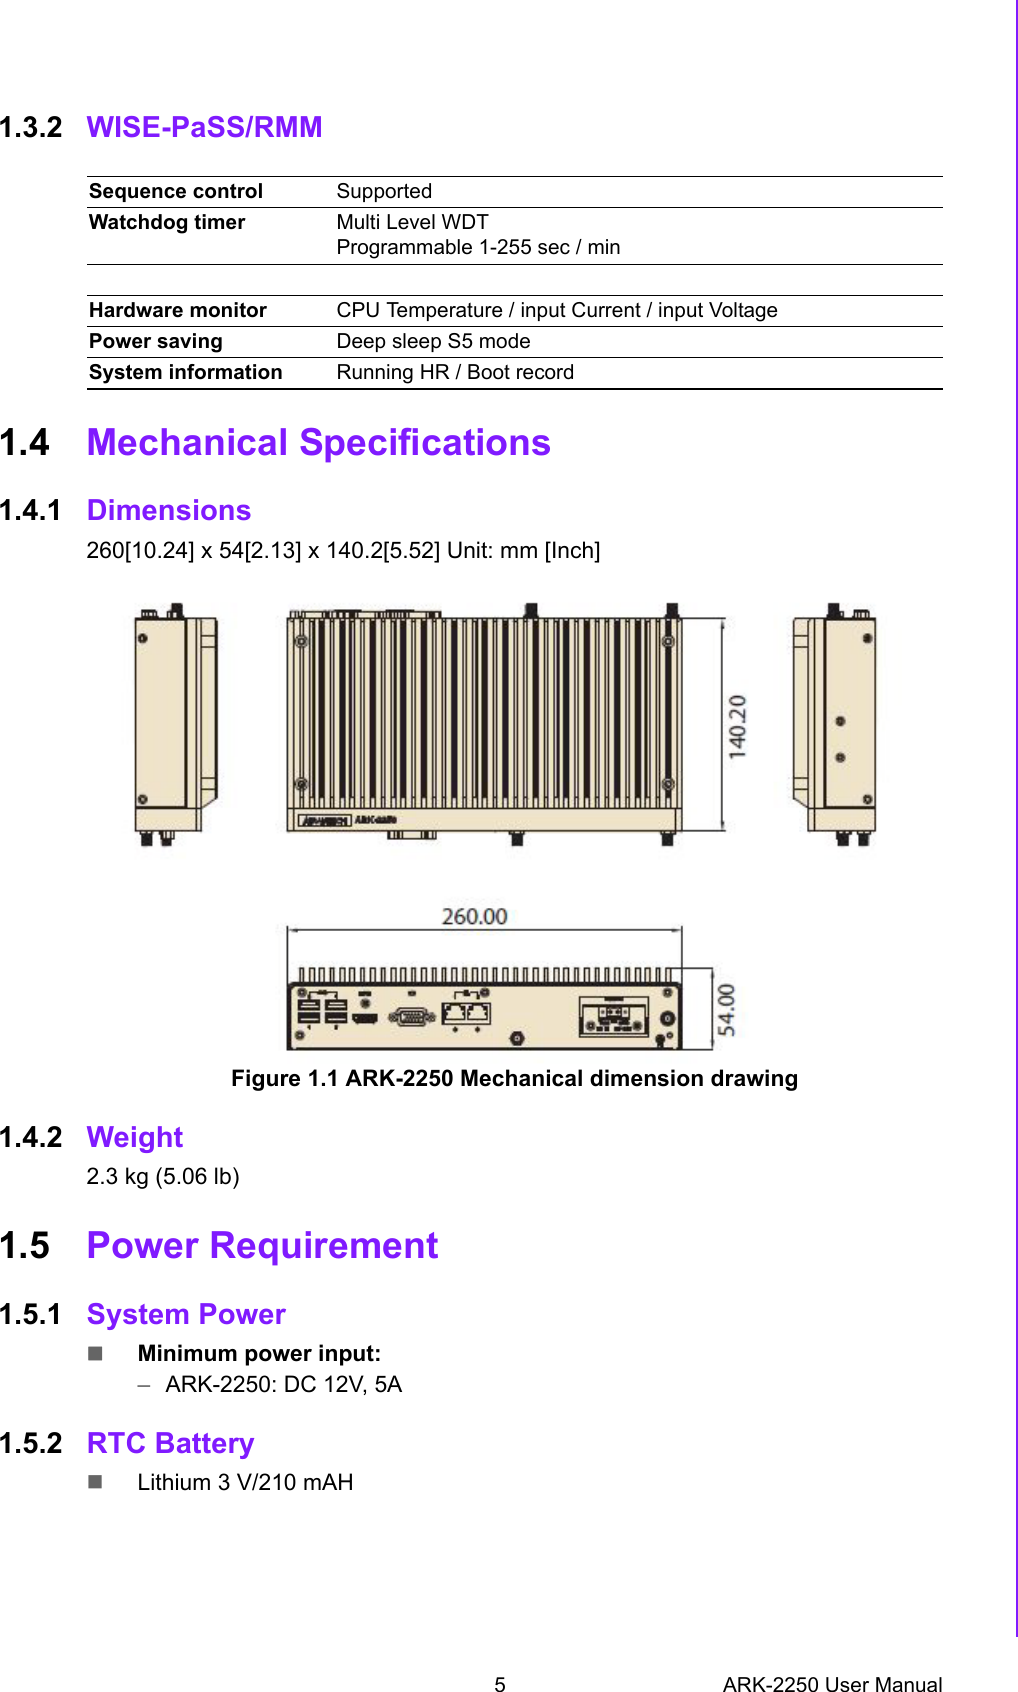 5 ARK-2250 User ManualChapter 1 General Introduction1.3.2 WISE-PaSS/RMM1.4 Mechanical Specifications1.4.1 Dimensions260[10.24] x 54[2.13] x 140.2[5.52] Unit: mm [Inch]Figure 1.1 ARK-2250 Mechanical dimension drawing1.4.2 Weight2.3 kg (5.06 lb)1.5 Power Requirement1.5.1 System PowerMinimum power input: –ARK-2250: DC 12V, 5A1.5.2 RTC BatteryLithium 3 V/210 mAHSequence control SupportedWatchdog timer Multi Level WDT Programmable 1-255 sec / minHardware monitor CPU Temperature / input Current / input VoltagePower saving Deep sleep S5 mode System information Running HR / Boot record